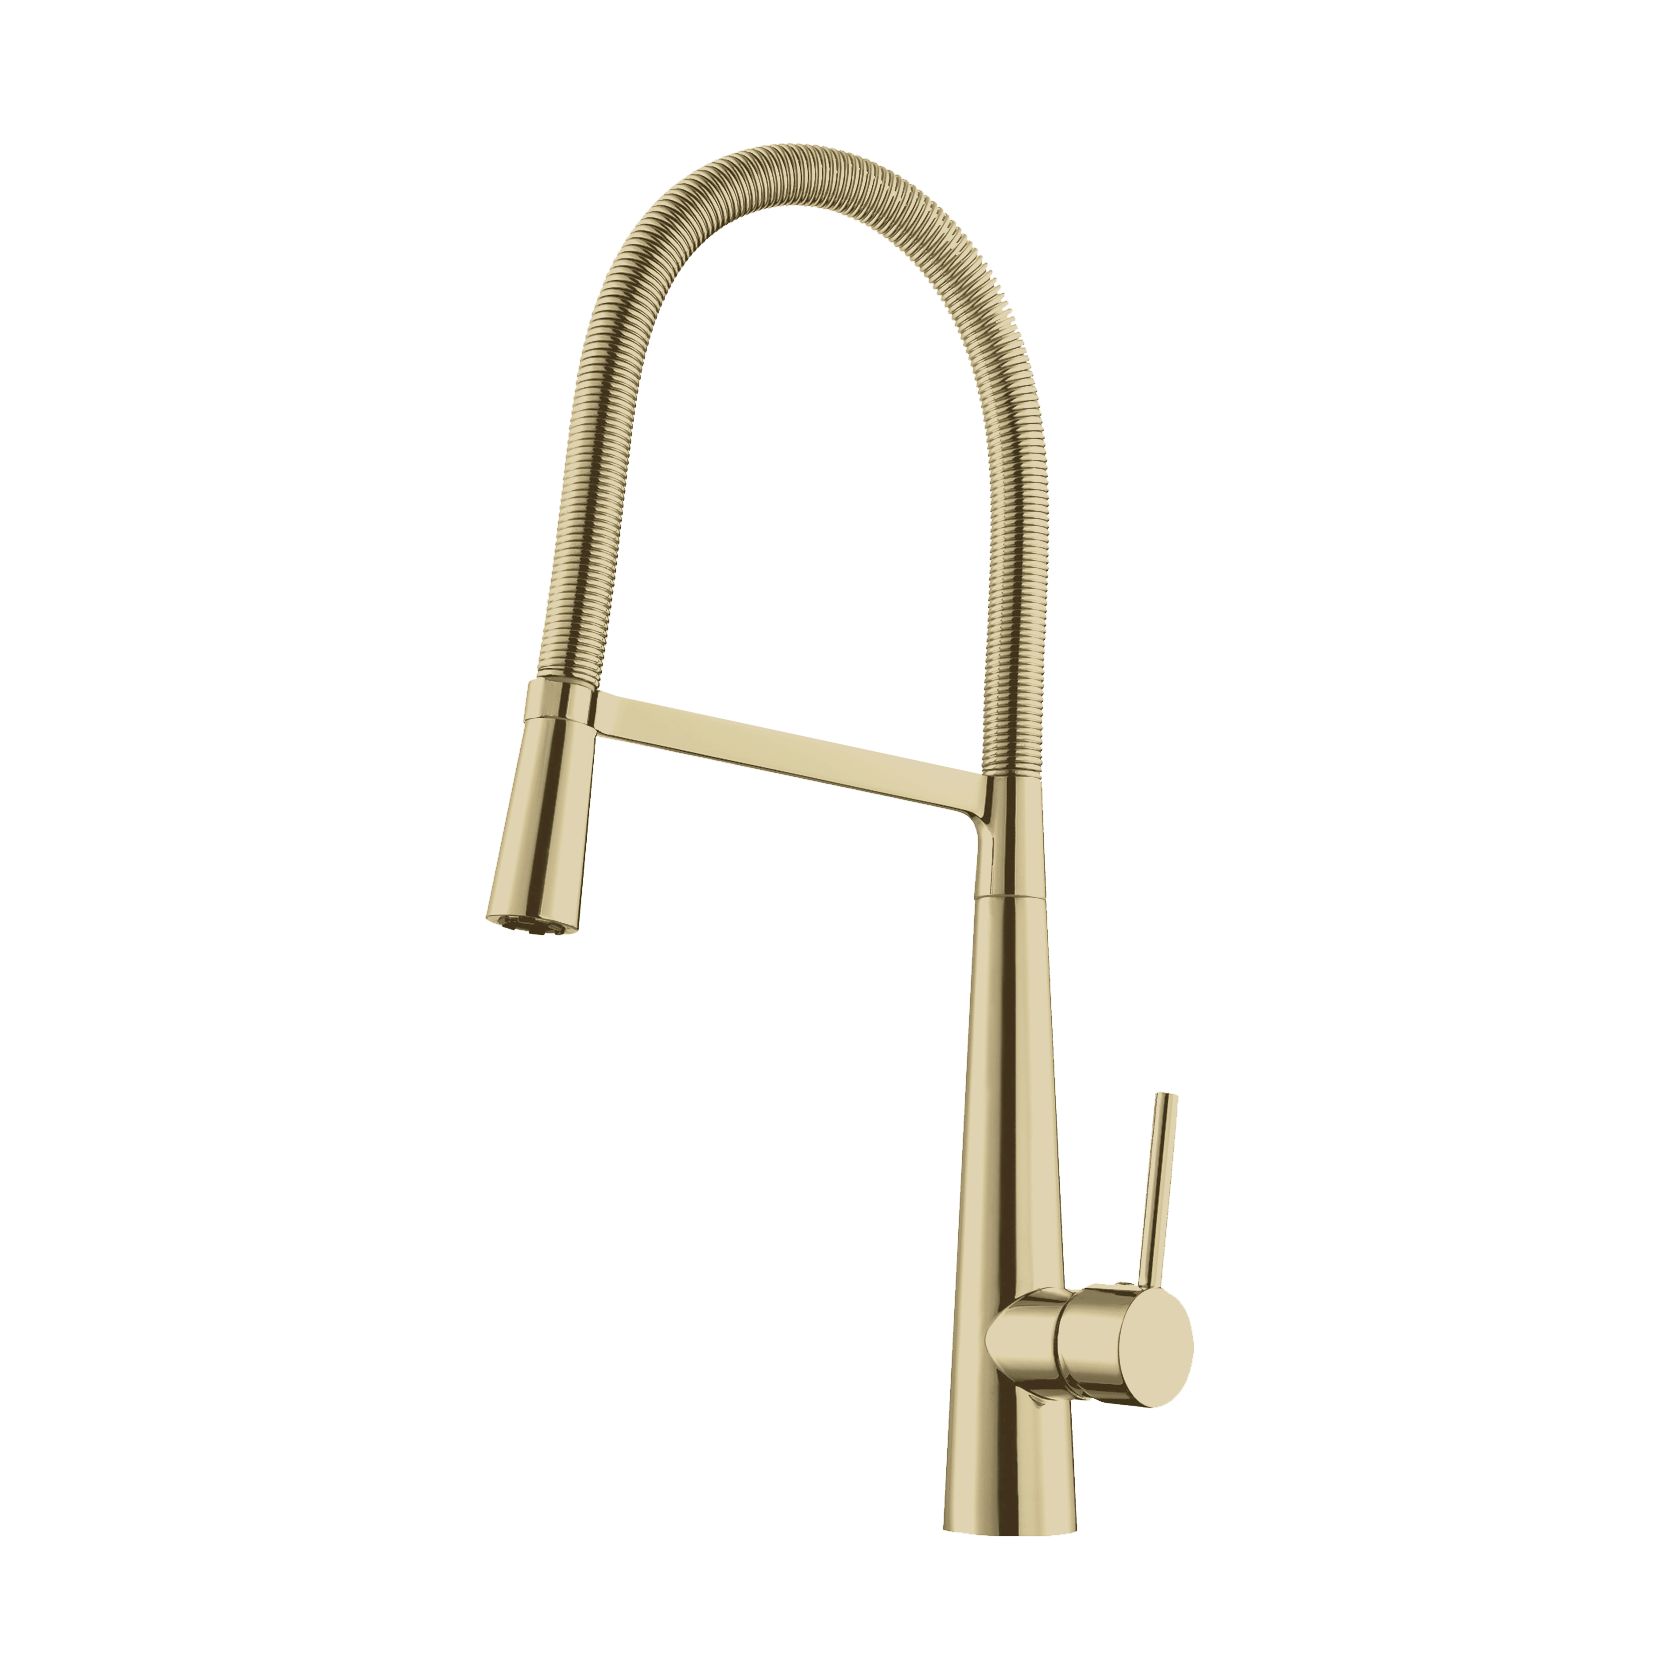 Kitchen mixer tap brushed brass w/ pull down spout